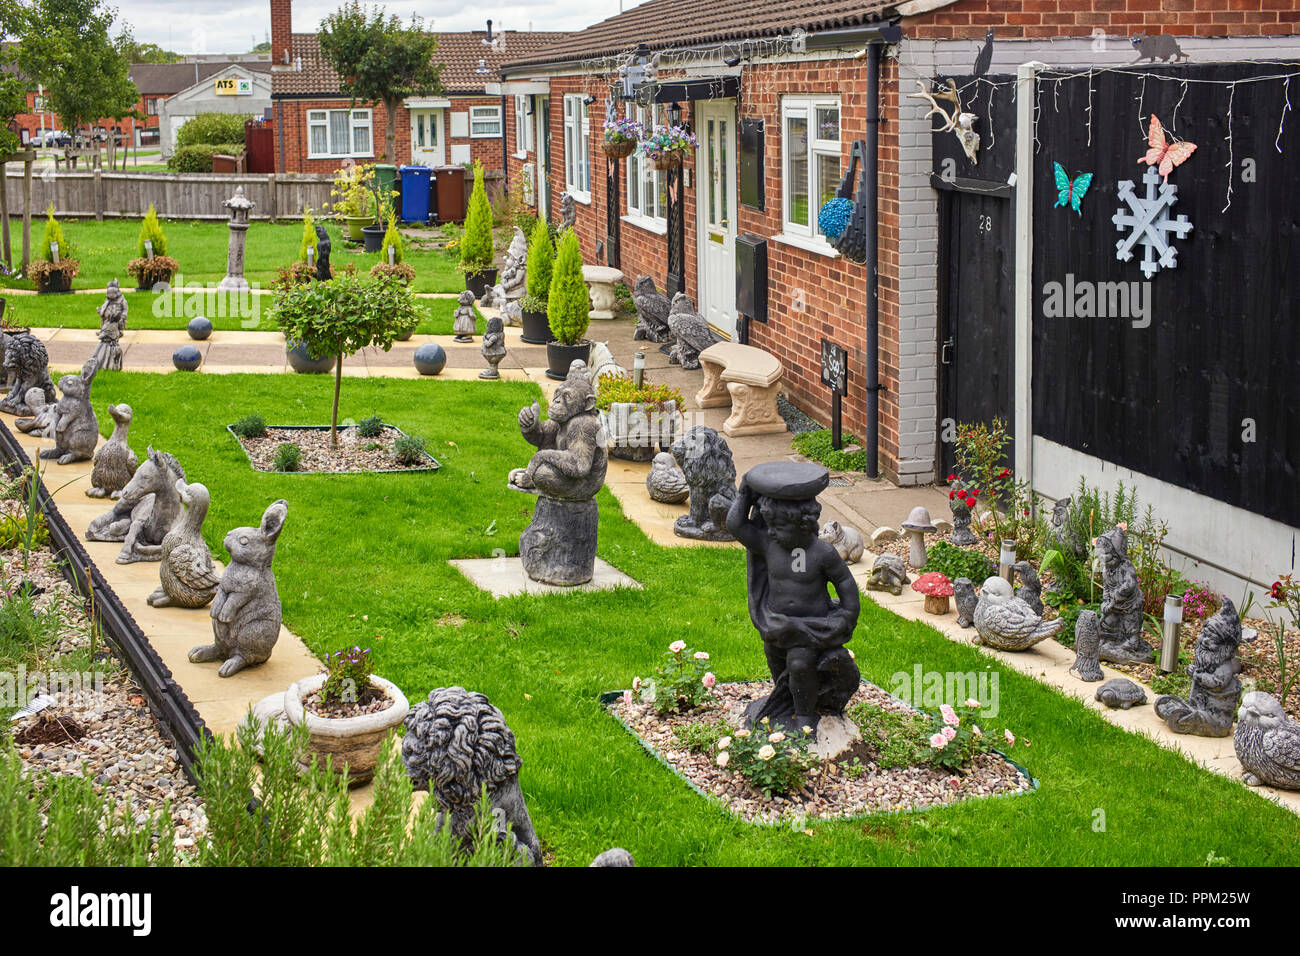 Excessive number of garden ornaments in the front garden of a bungalow in Rugeley, Staffordshire Stock Photo